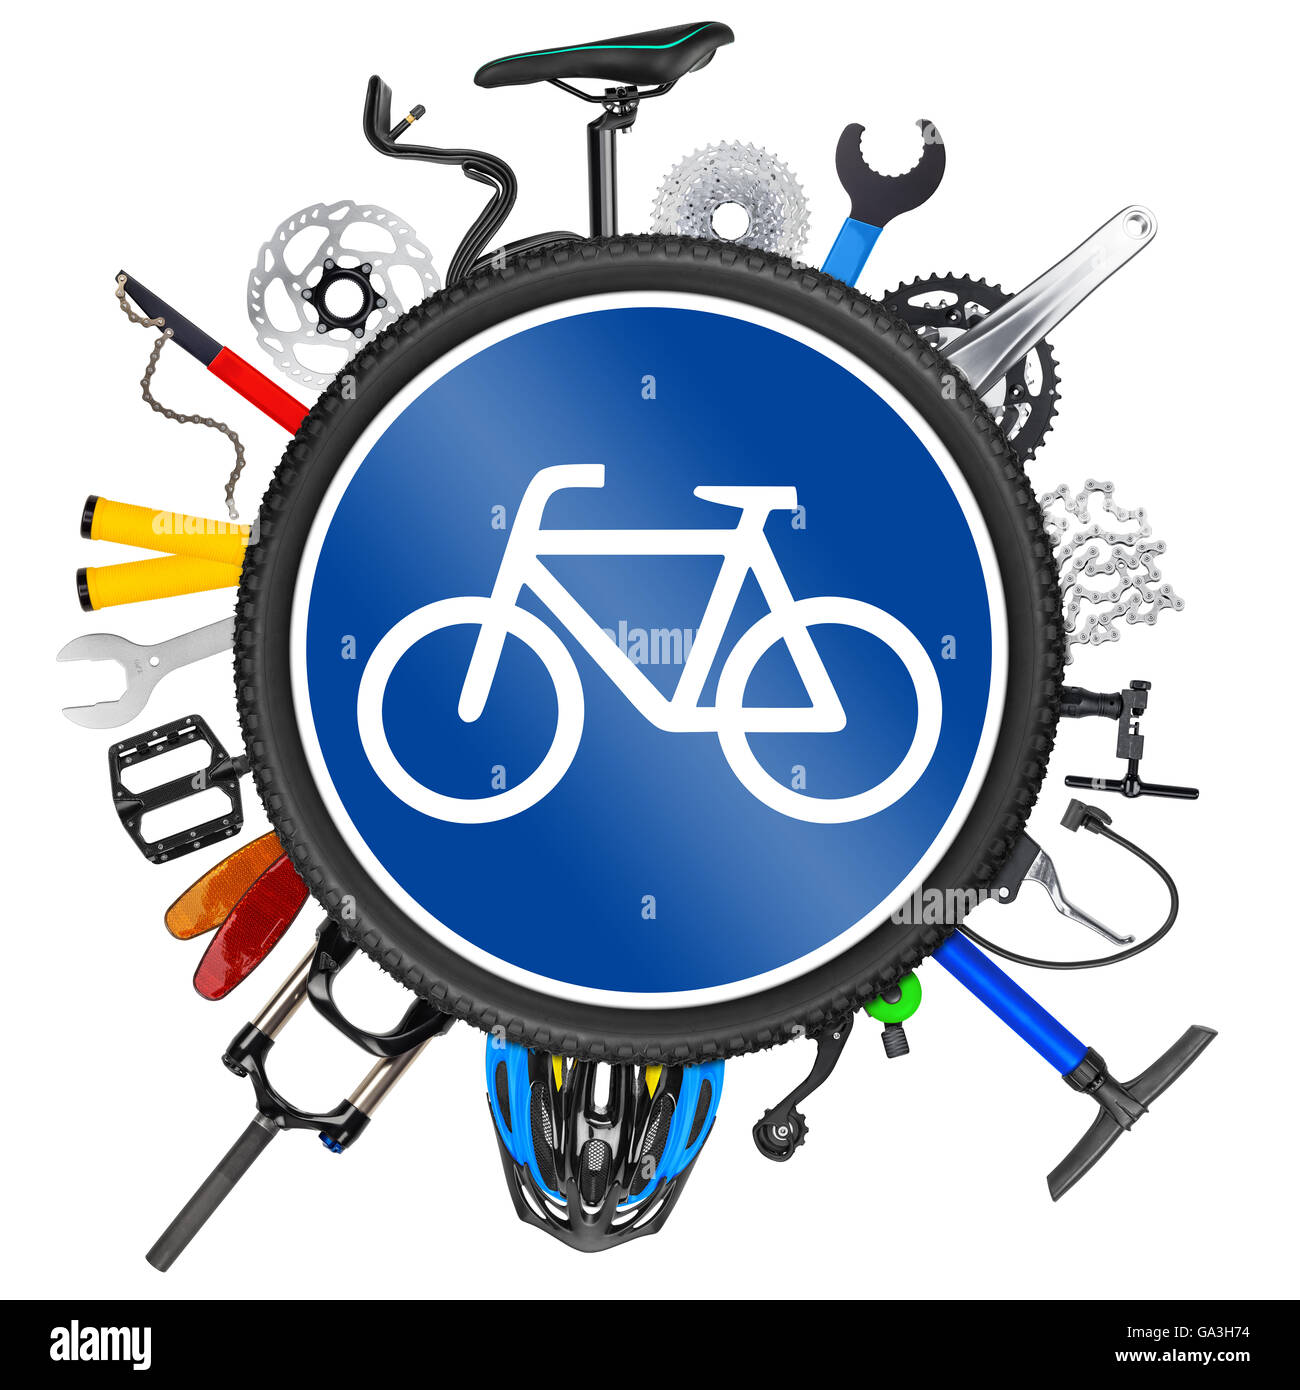 bicycle road sign concept with various bike parts isolated on white background Stock Photo